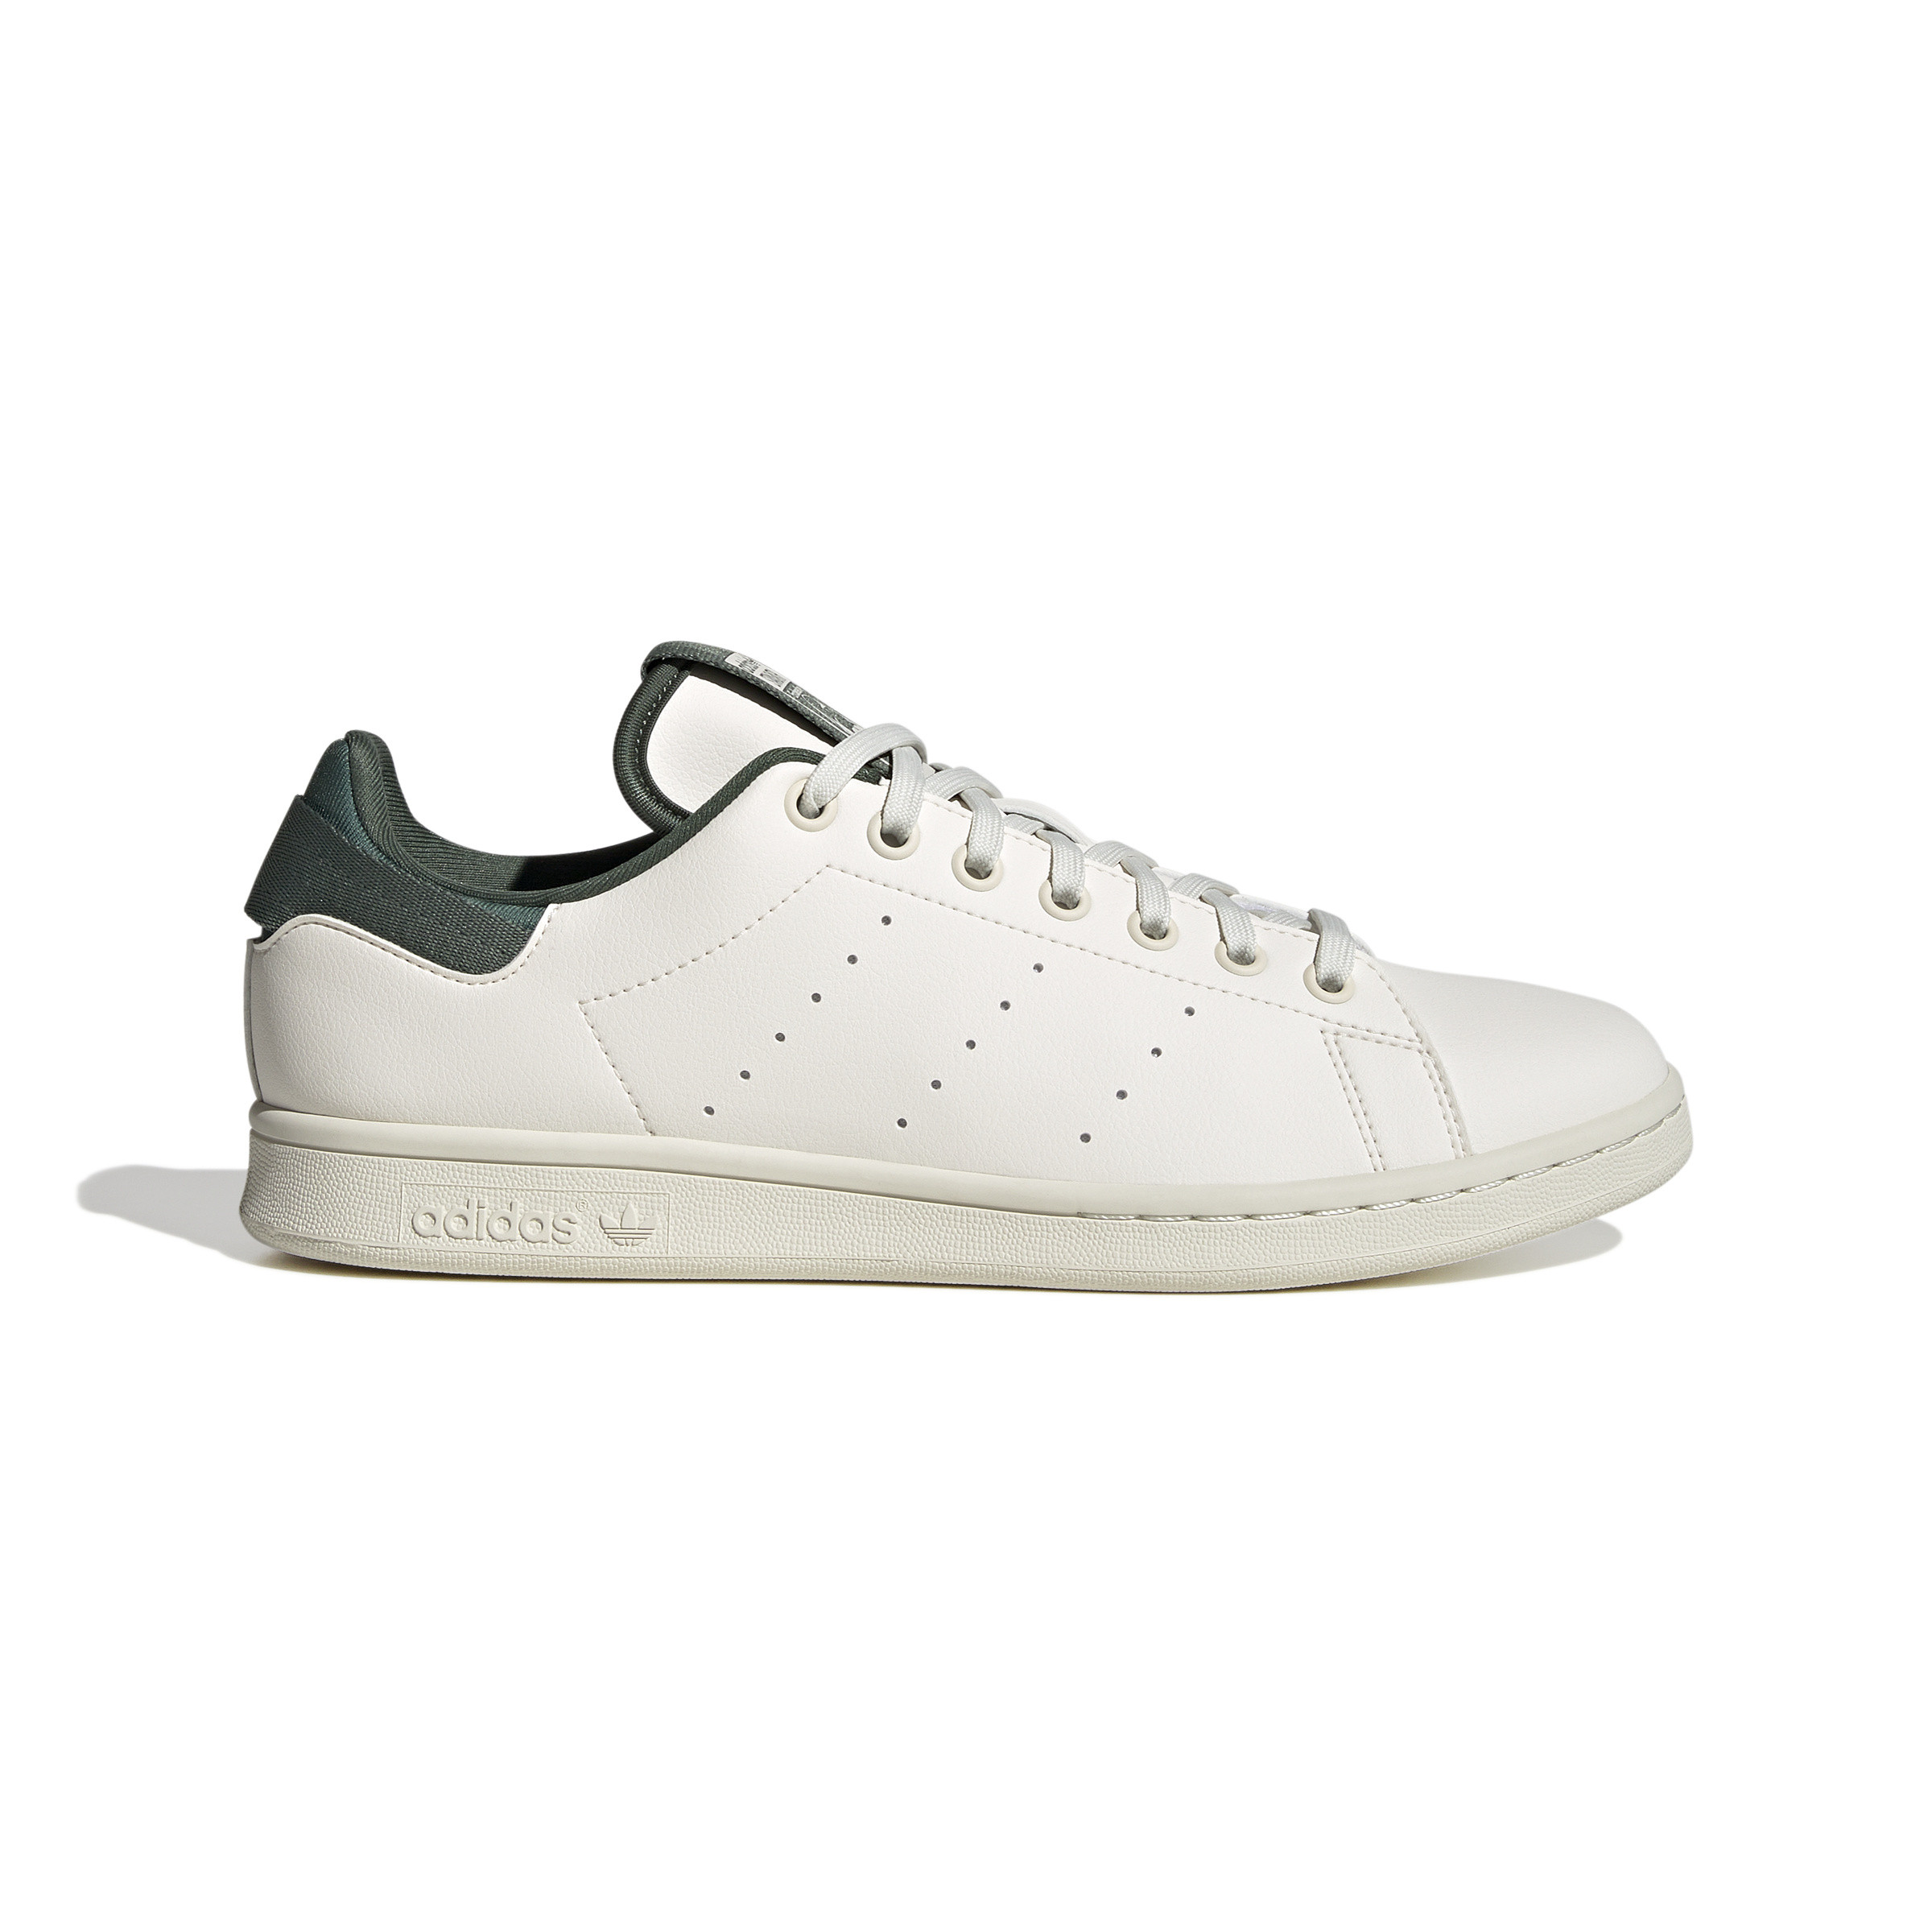 Adidas - Stan Smith Parley Shoes, White, large image number 0